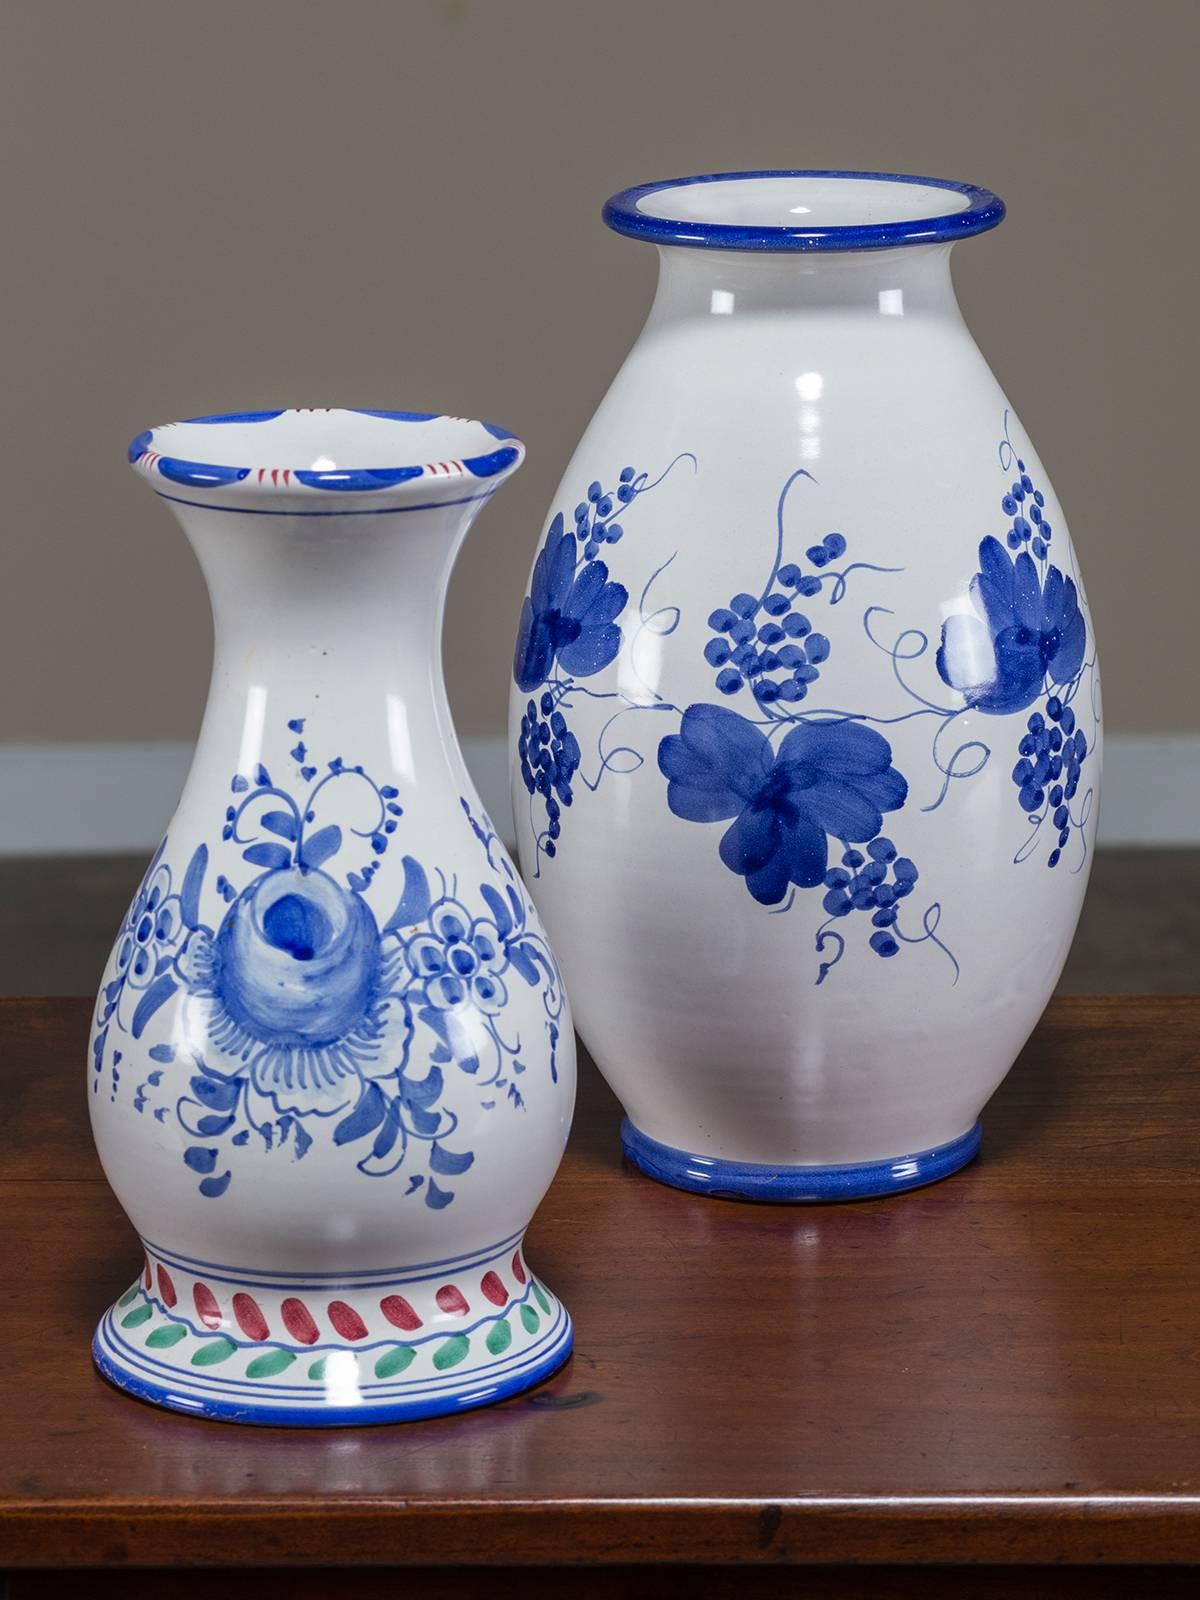 Be the first to see our new arrivals directly through 1stdibs! Please click follow dealer below. 

This set of charming blue and white vintage Italian vases are each hand thrown and painted from the famous Solimene Ceramic workshop located in Vietri